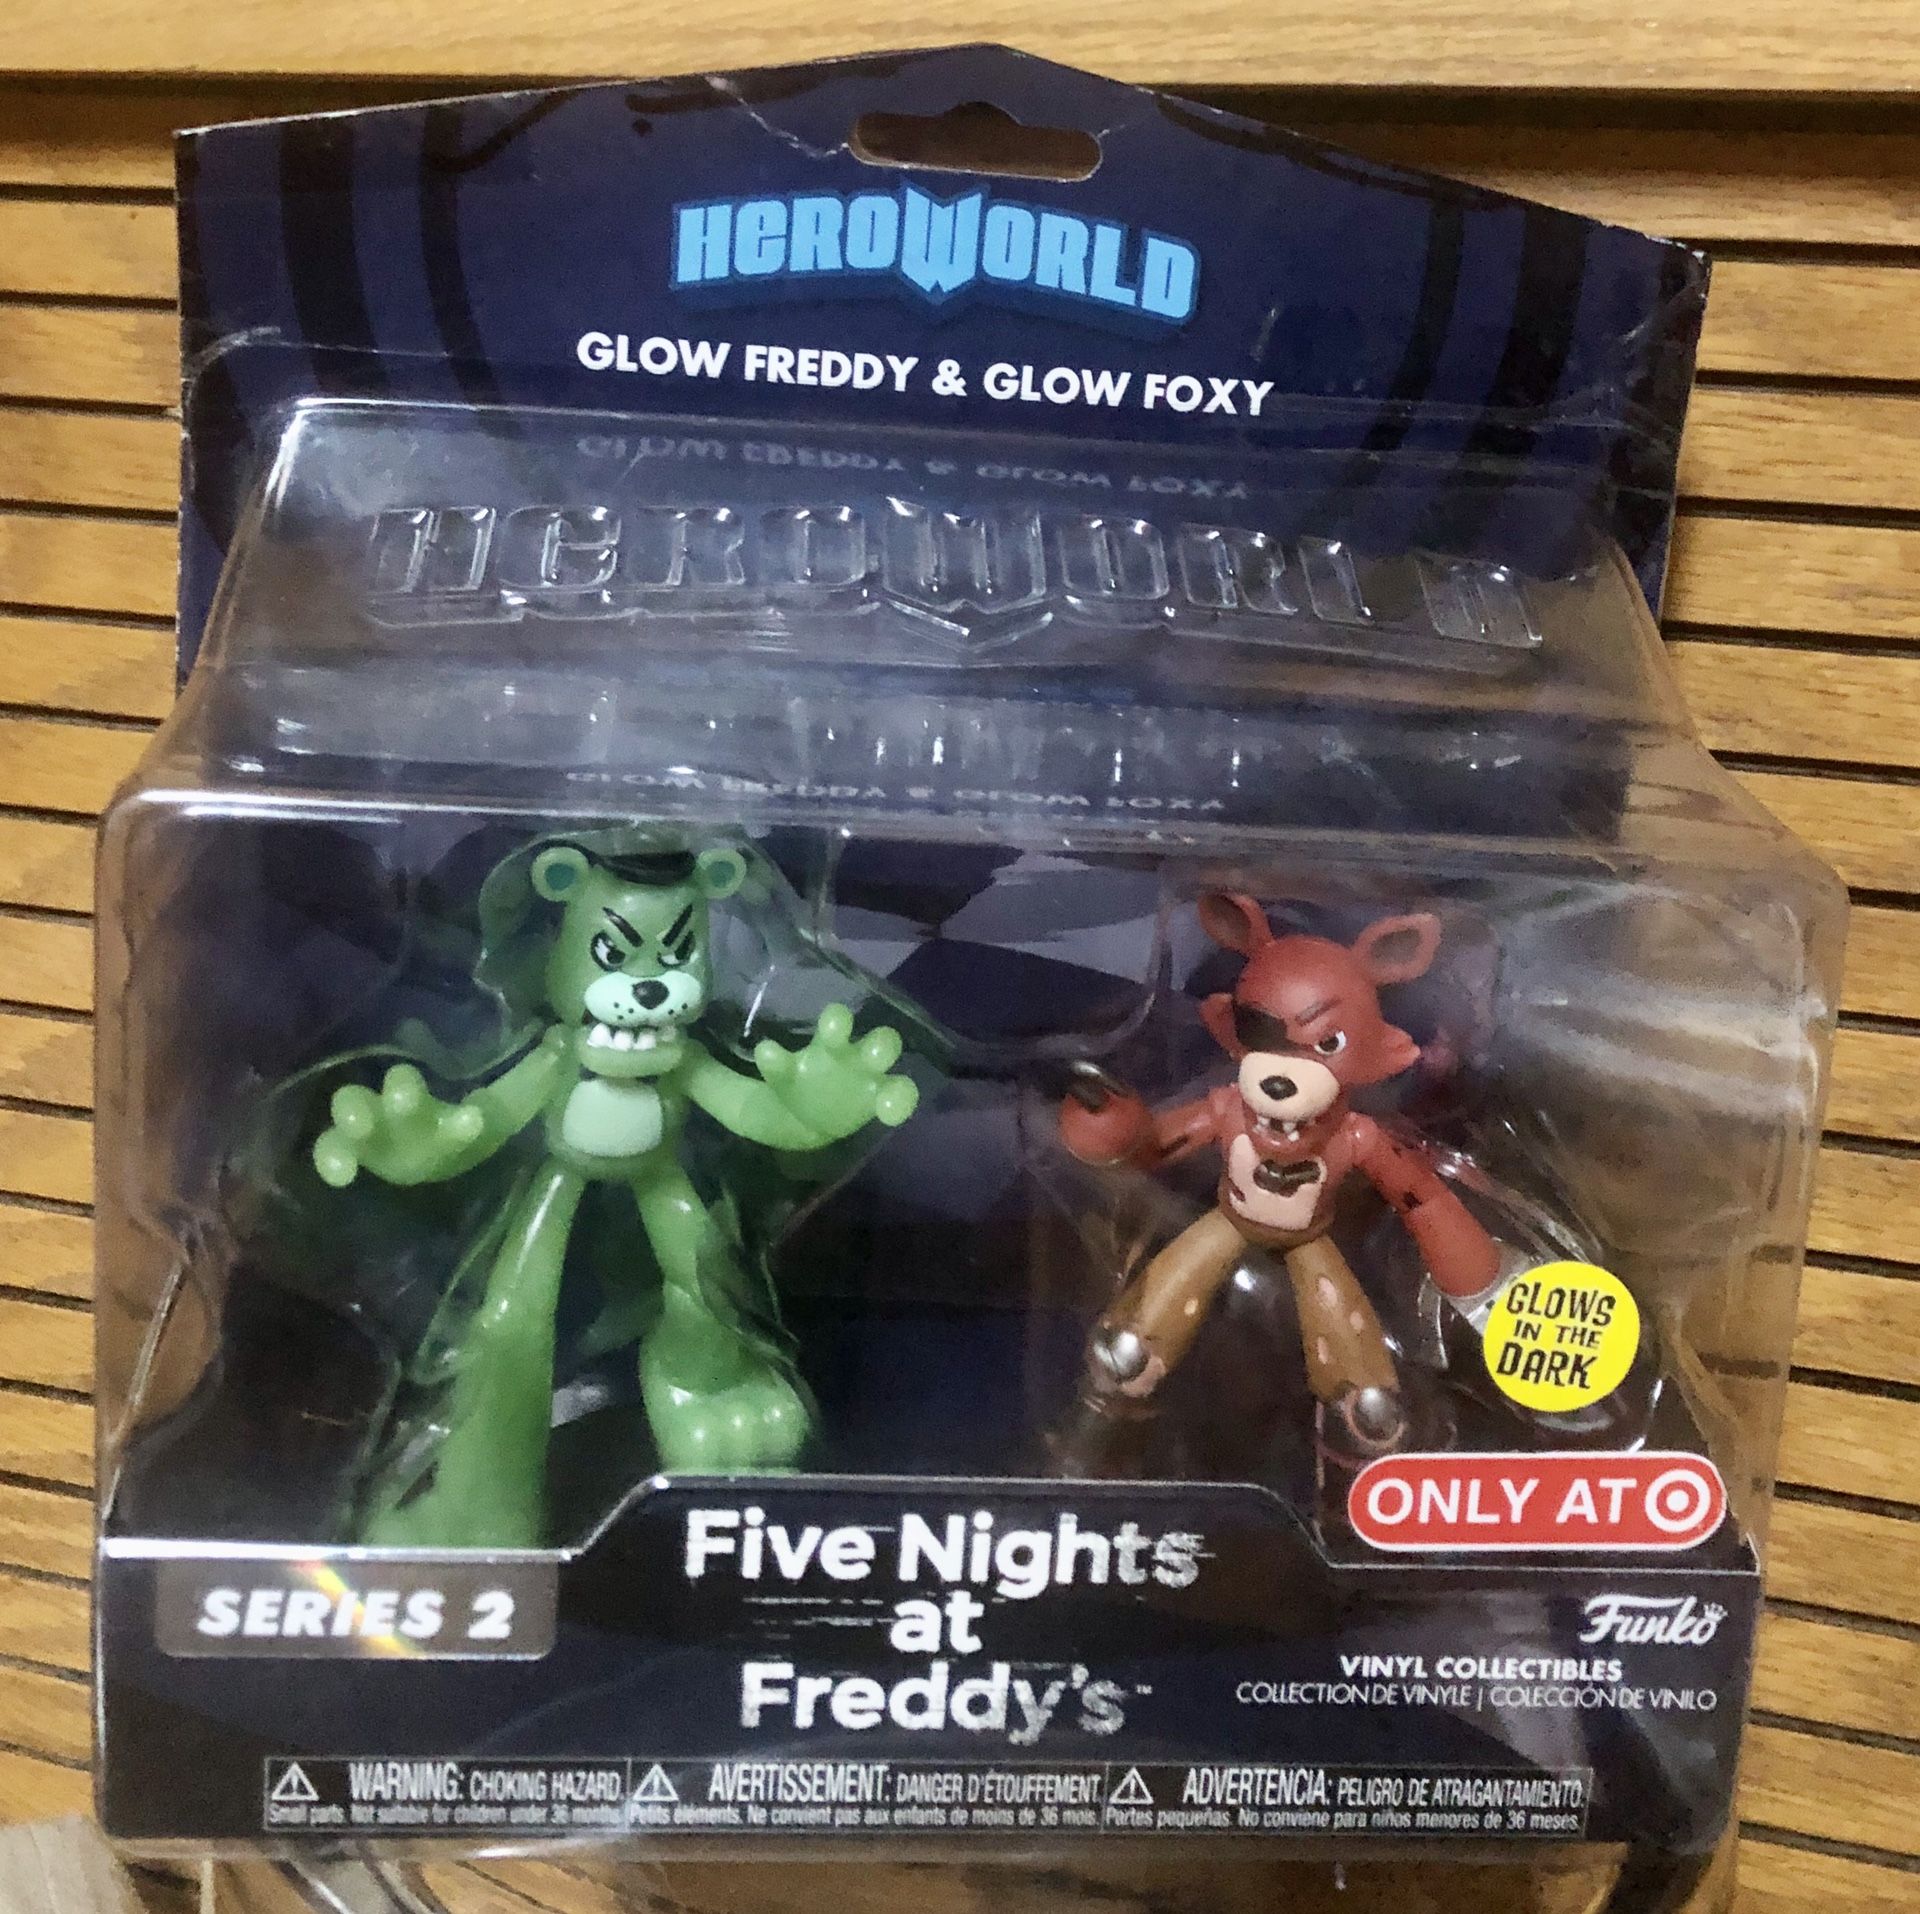 Five Nights at Freddy’s Figures